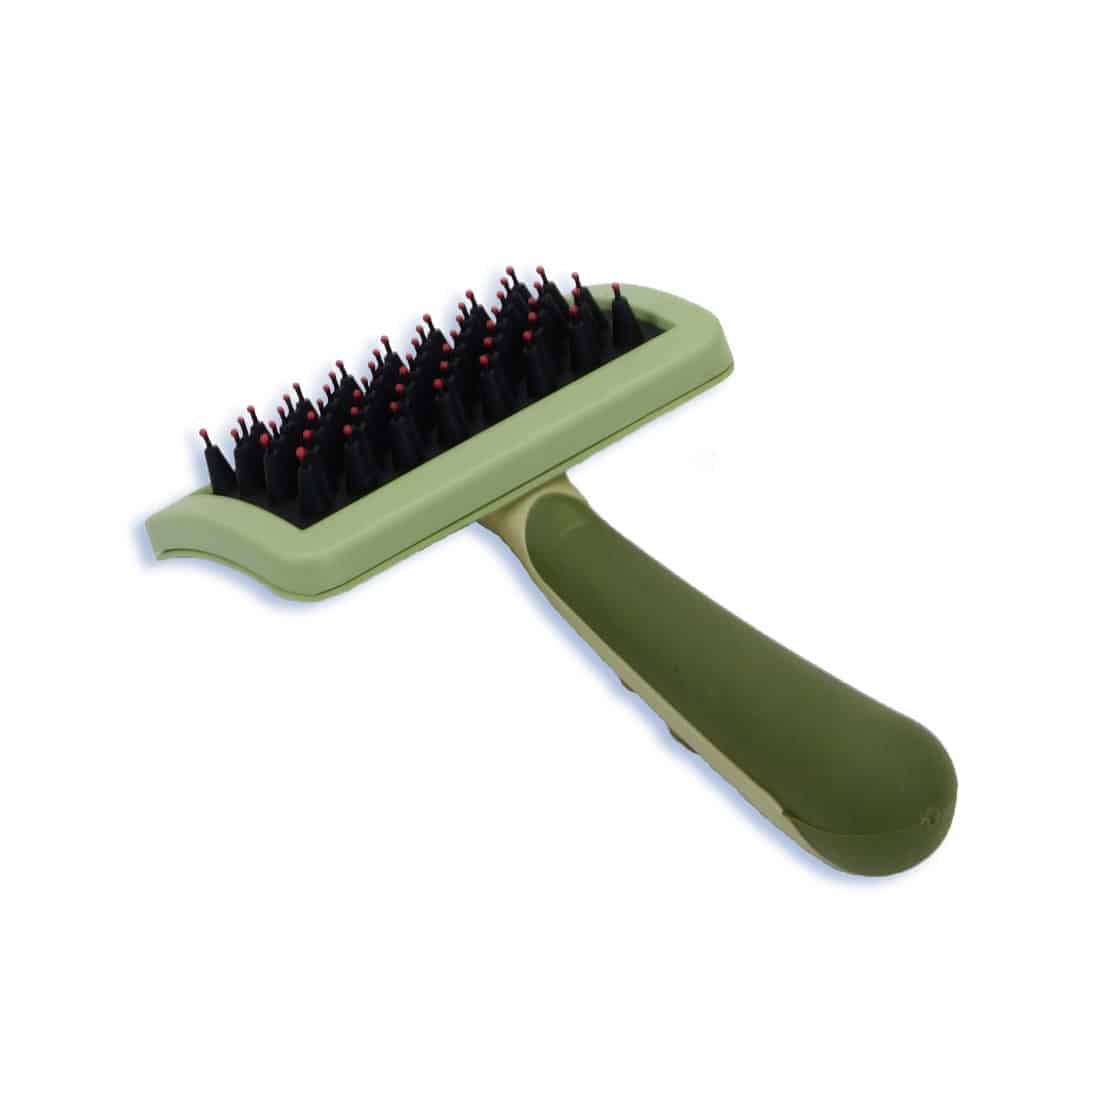 w422-ncl00-1 Coastal Pet Products Safari Nylon Coated Tip Dog Brush for Shorthaired Breeds - Green (6.75"x4"x1")